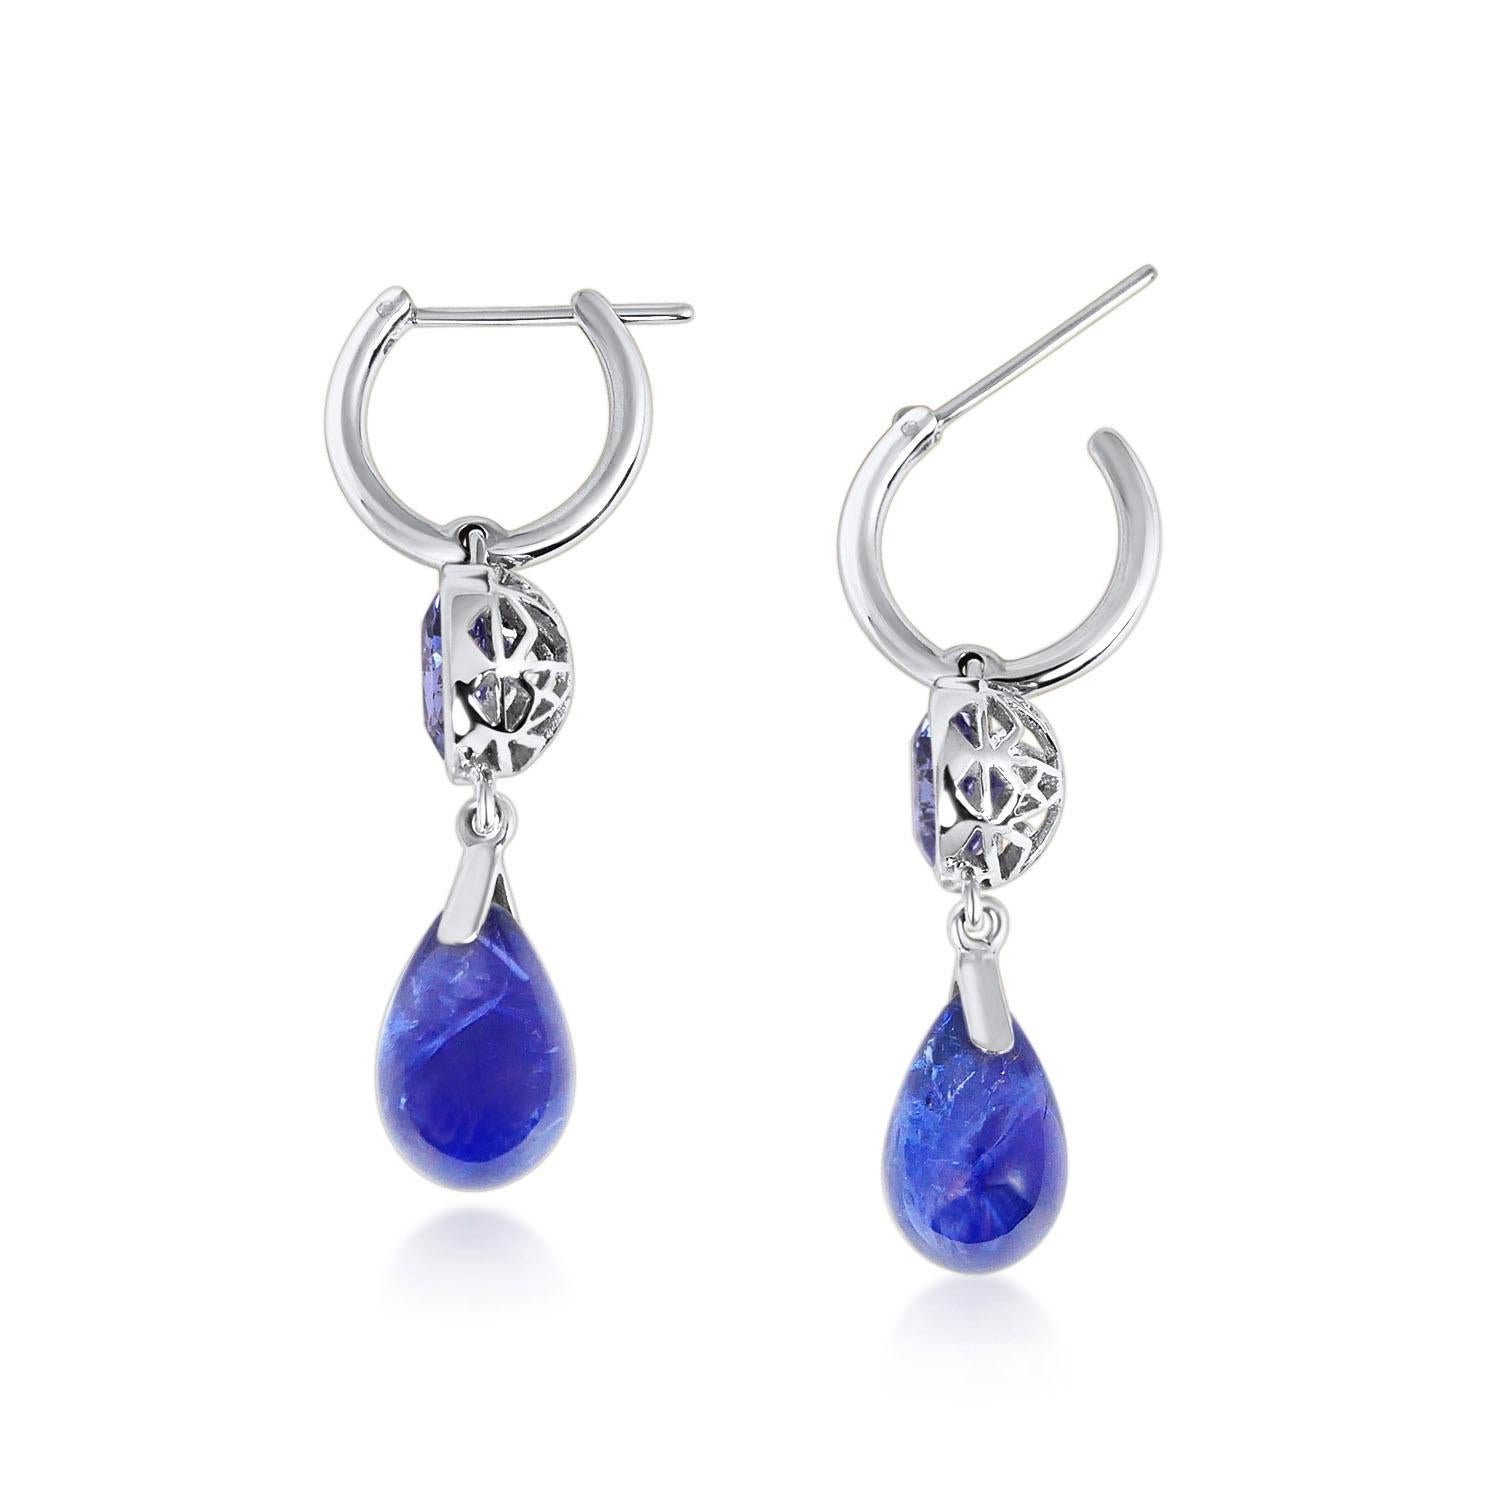 Handcrafted 2.80 & 10.95 Carats Tanzanites 18 Karat White Gold Drop Earrings. Dancing drops carved in Tanzanite under a set of round cut 8mm Tanzanite stones encased in our iconic hand pierced gold lace to let the light through. A diamond has been